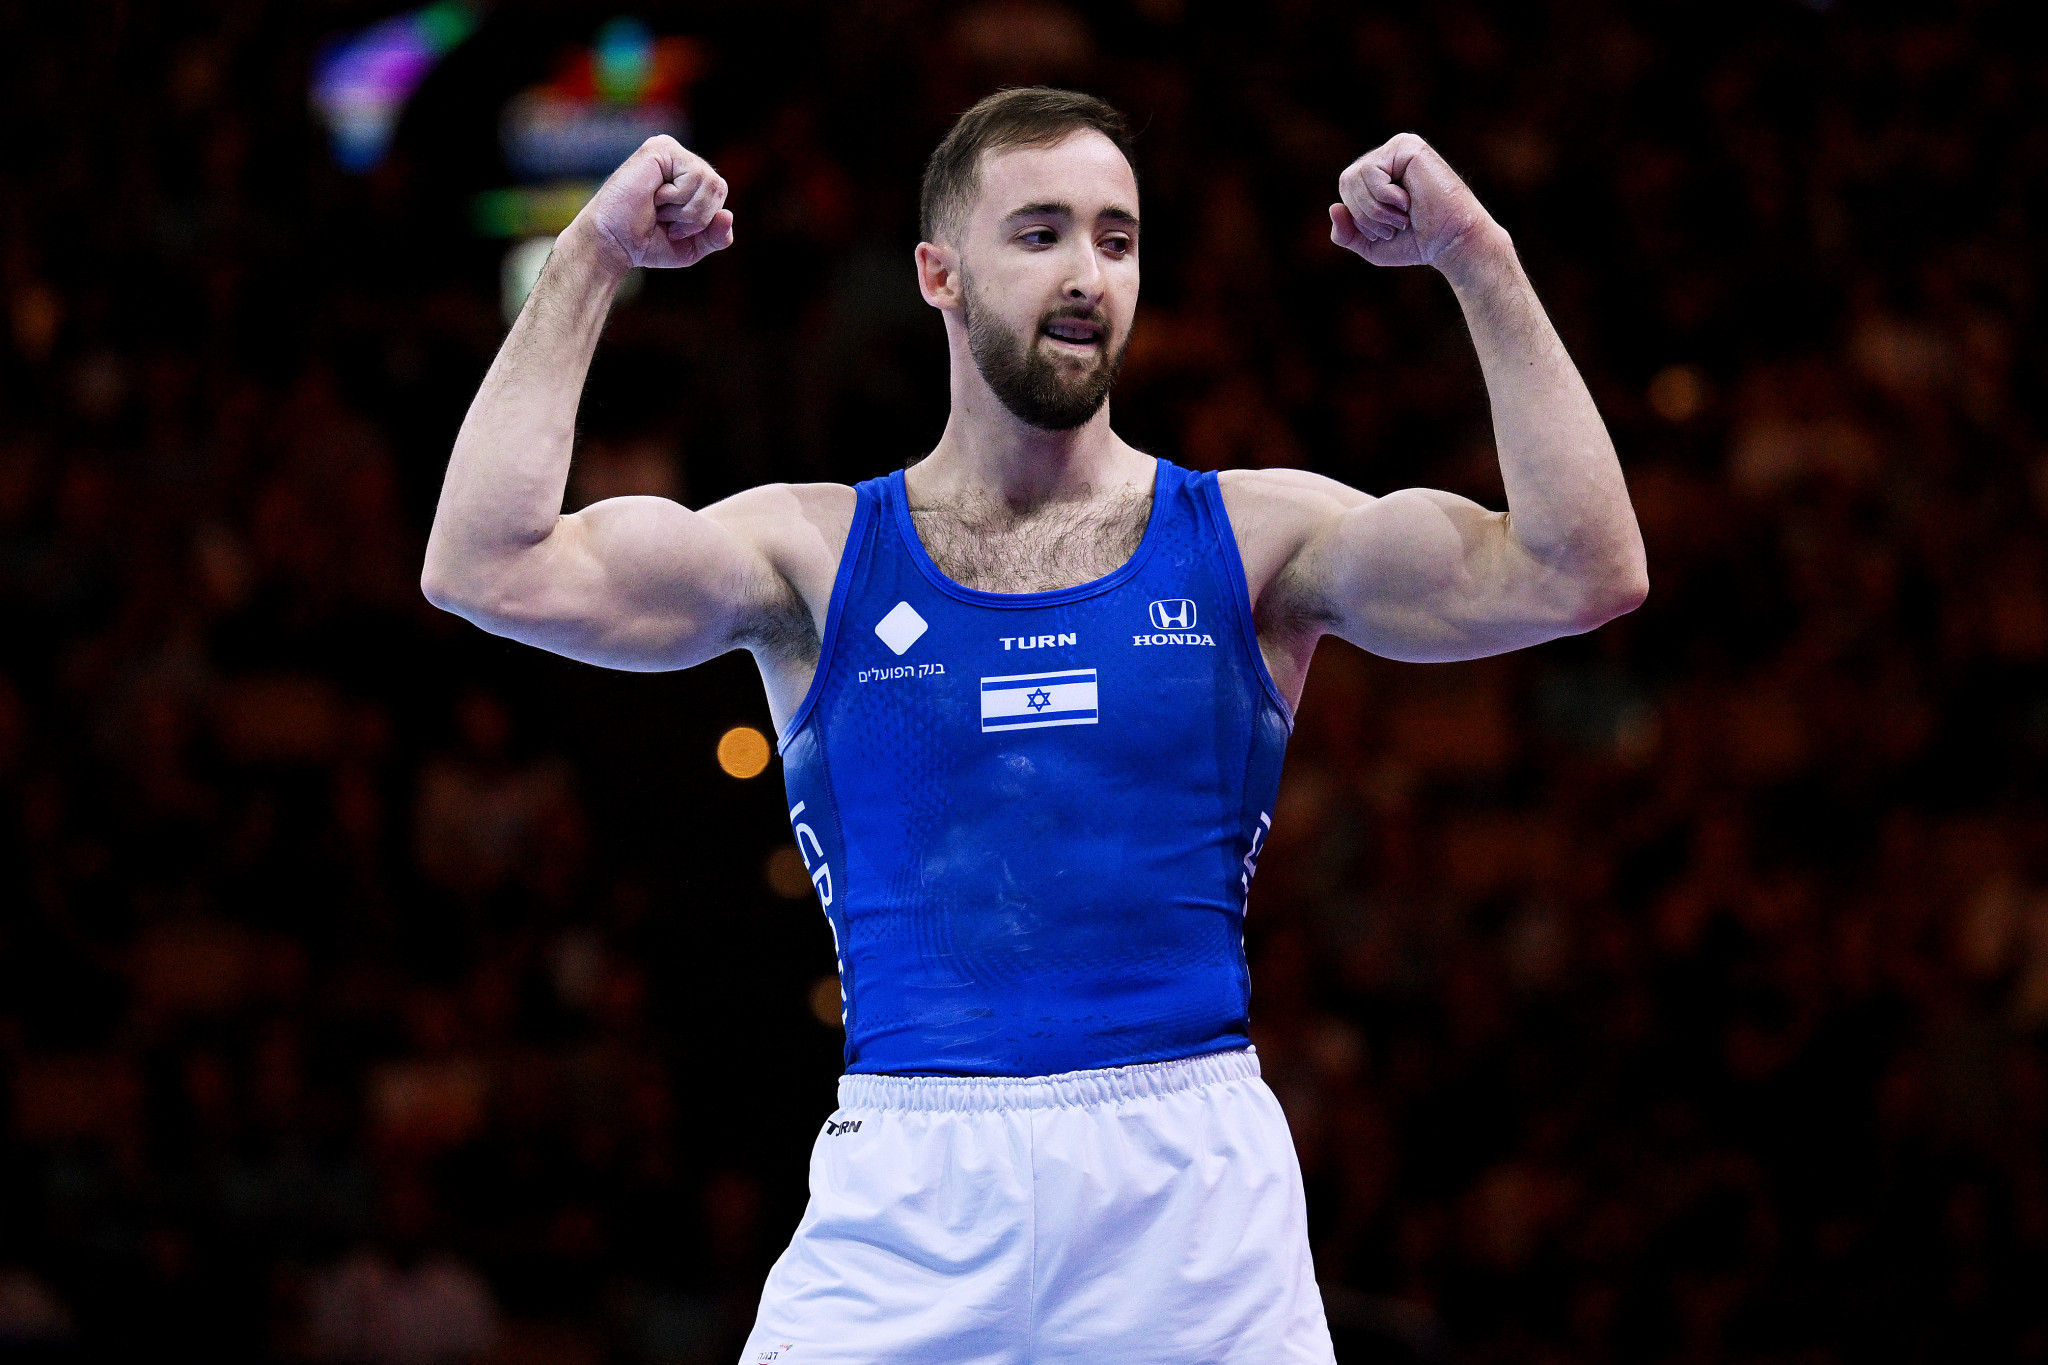 Floor exercise Olympic champion Artem Dolgopyat of Israel added the European title to his collection at Munich 2022 ©Getty Images